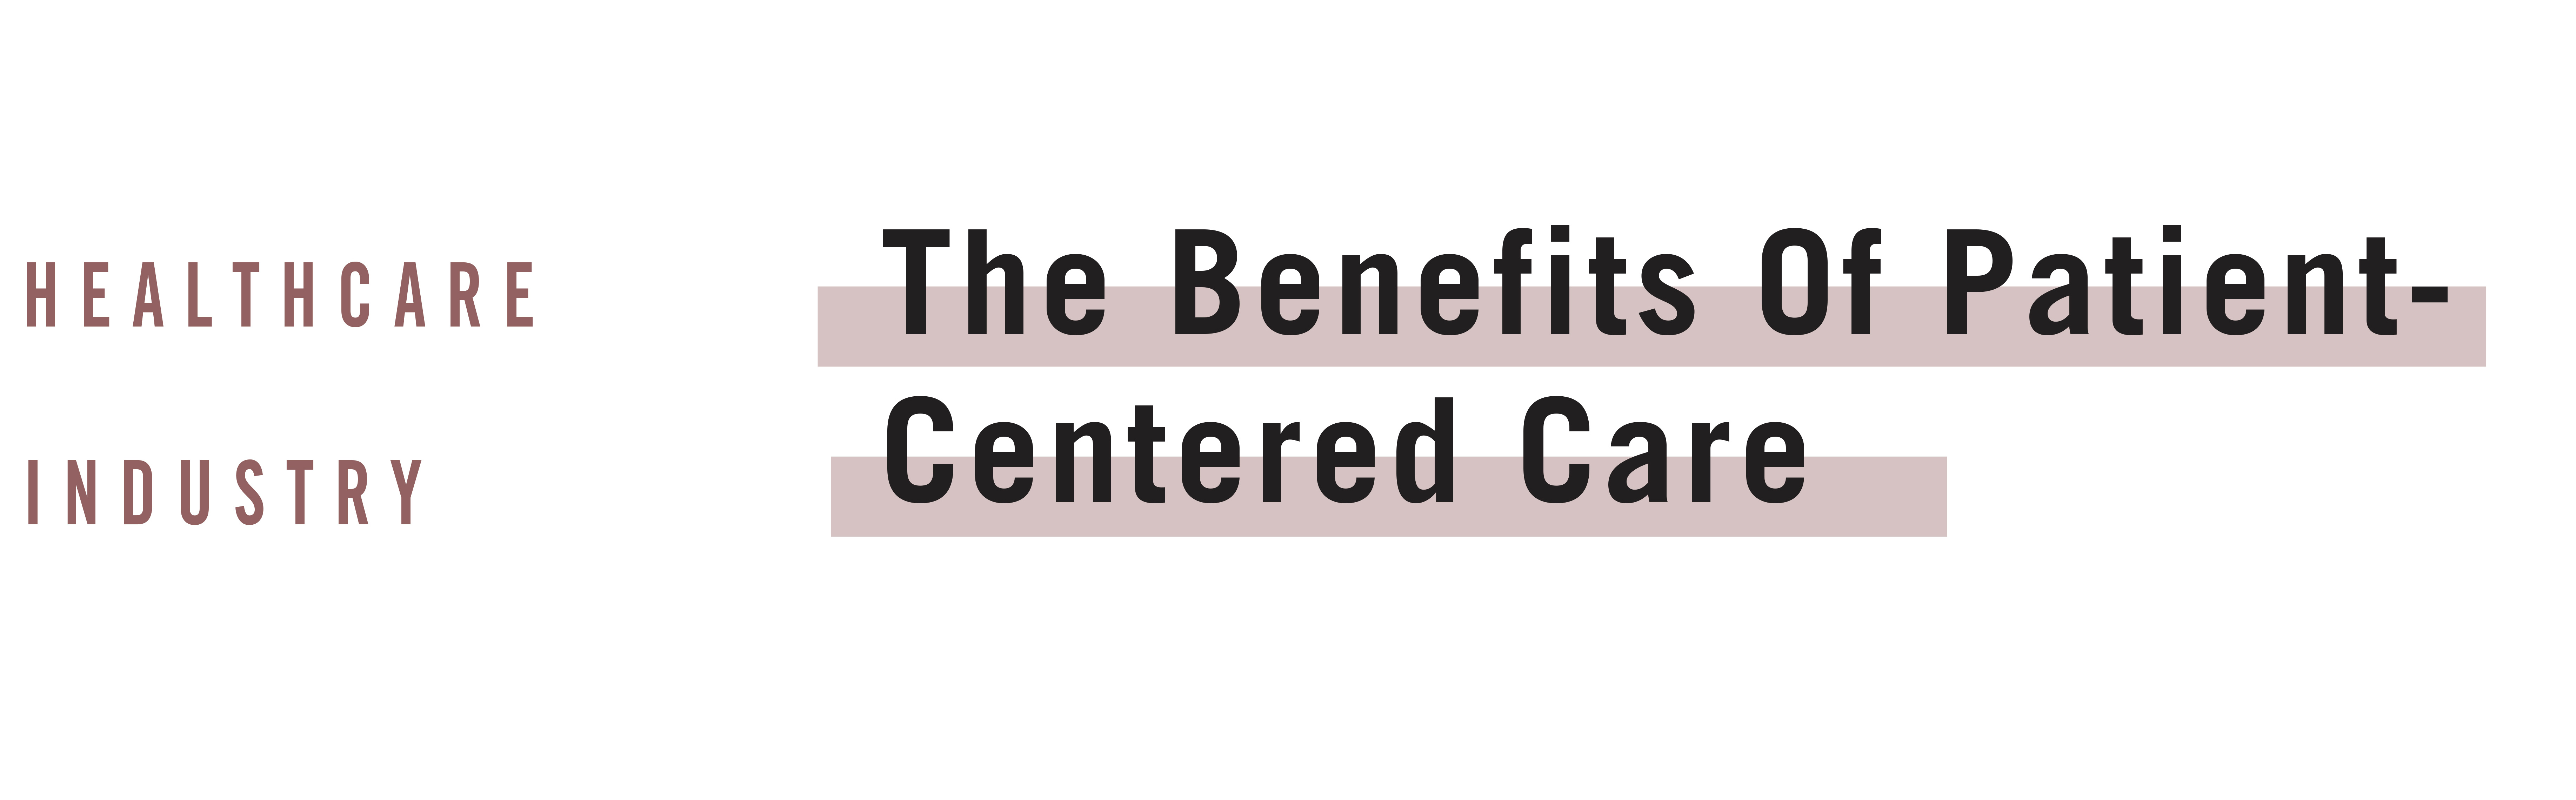 Patient-centered Healthcare: The Benefits